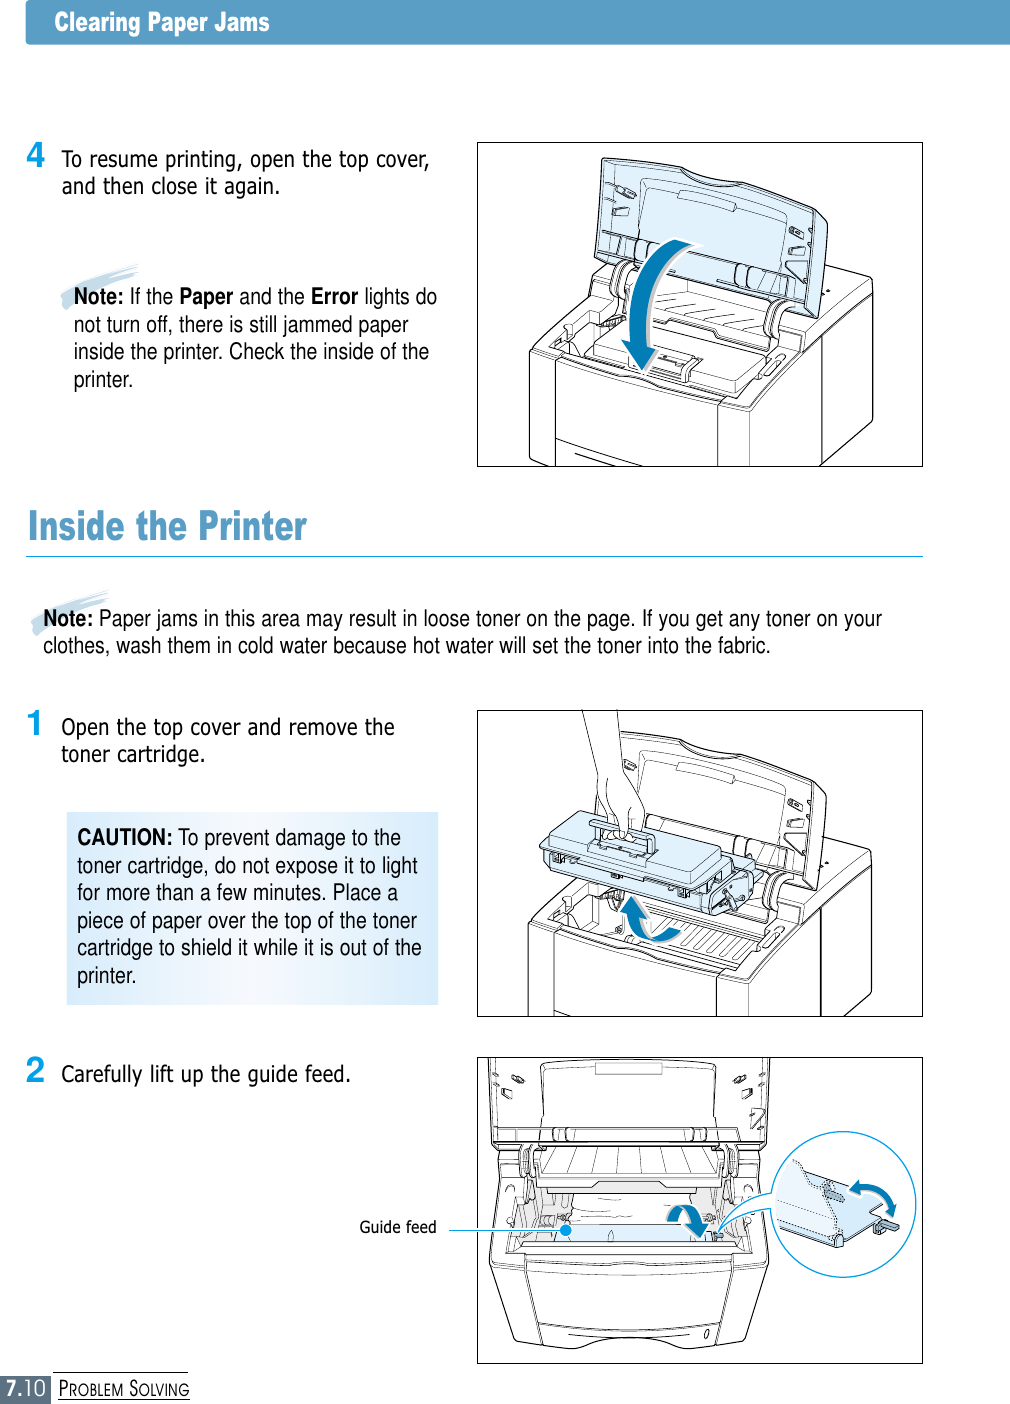 7.10PROBLEM SOLVINGClearing Paper Jams4To resume printing, open the top cover,and then close it again.Note: If the Paper and the Error lights donot turn off, there is still jammed paperinside the printer. Check the inside of theprinter.2Carefully lift up the guide feed.CAUTION: To prevent damage to thetoner cartridge, do not expose it to lightfor more than a few minutes. Place apiece of paper over the top of the tonercartridge to shield it while it is out of theprinter.Inside the Printer1Open the top cover and remove thetoner cartridge.Guide feedNote: Paper jams in this area may result in loose toner on the page. If you get any toner on yourclothes, wash them in cold water because hot water will set the toner into the fabric.